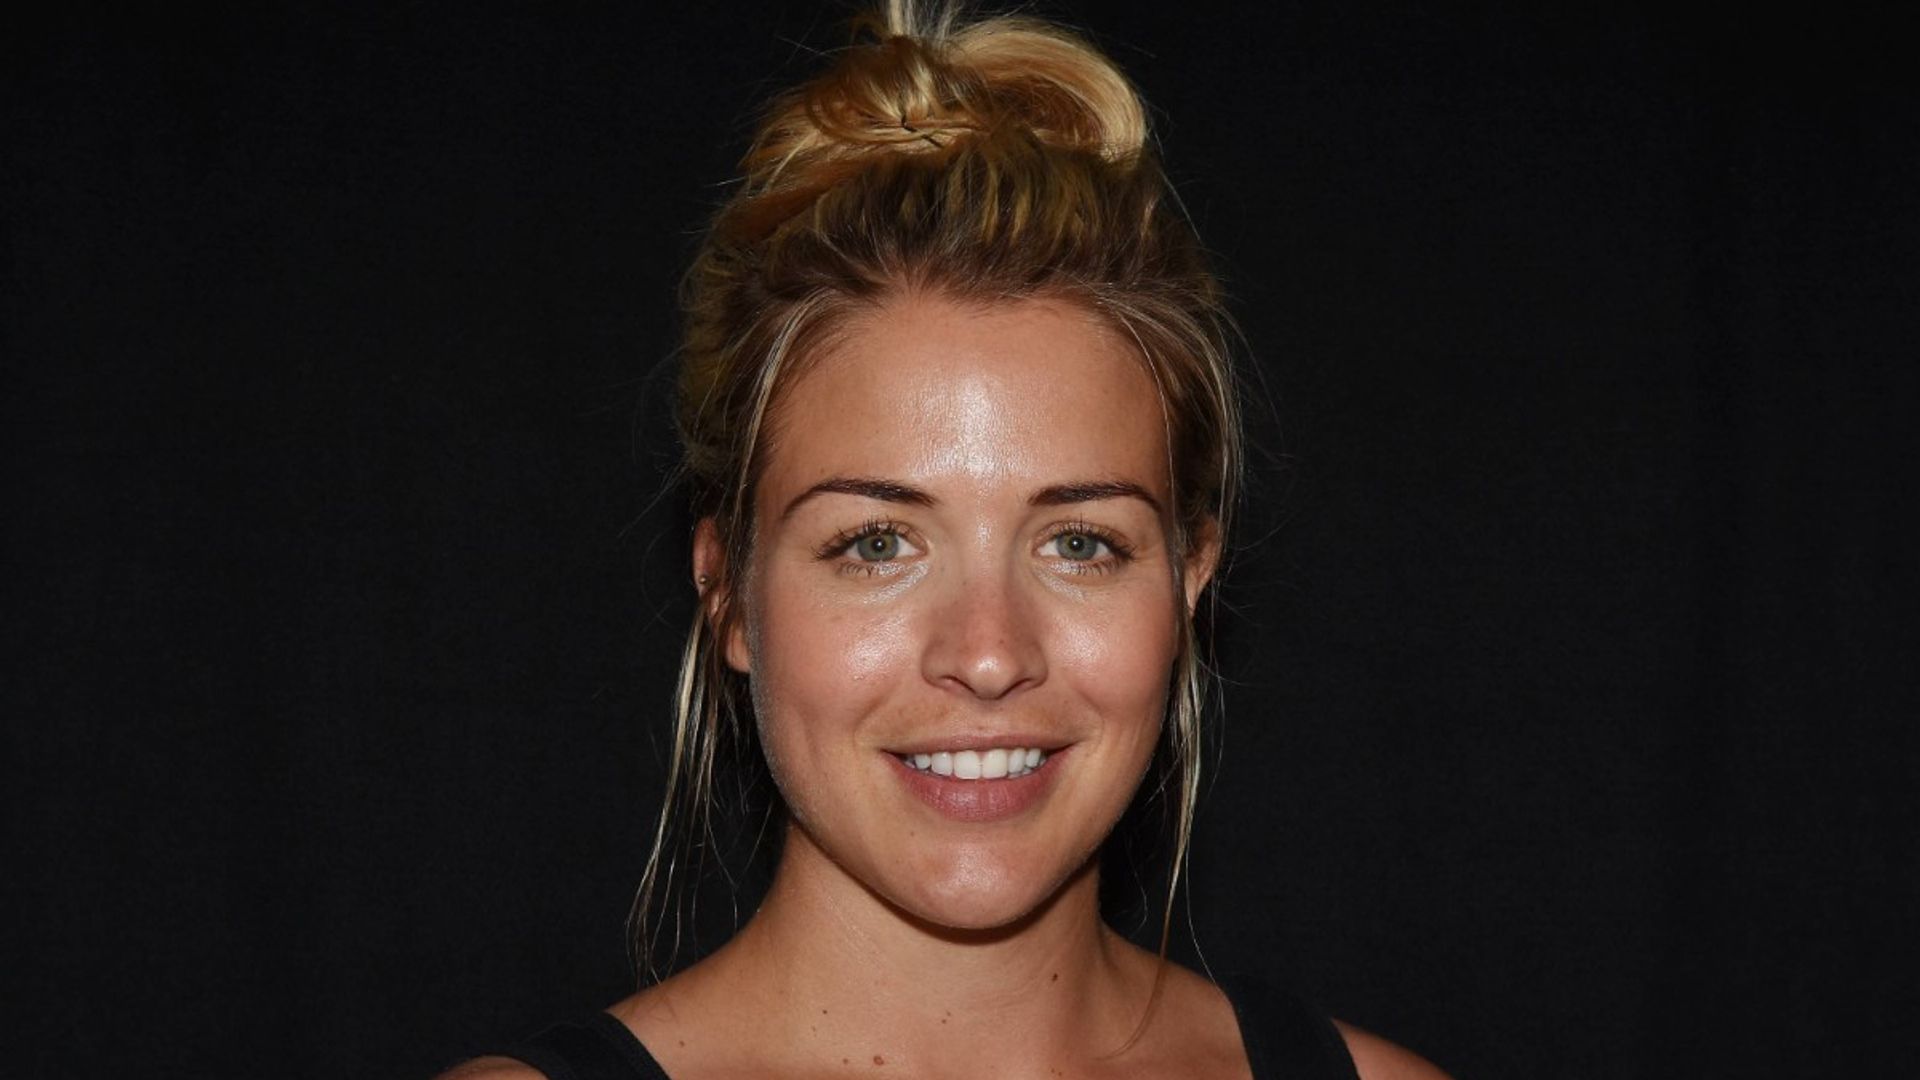 Gemma Atkinson inspires fans with impressive post-baby body transformation